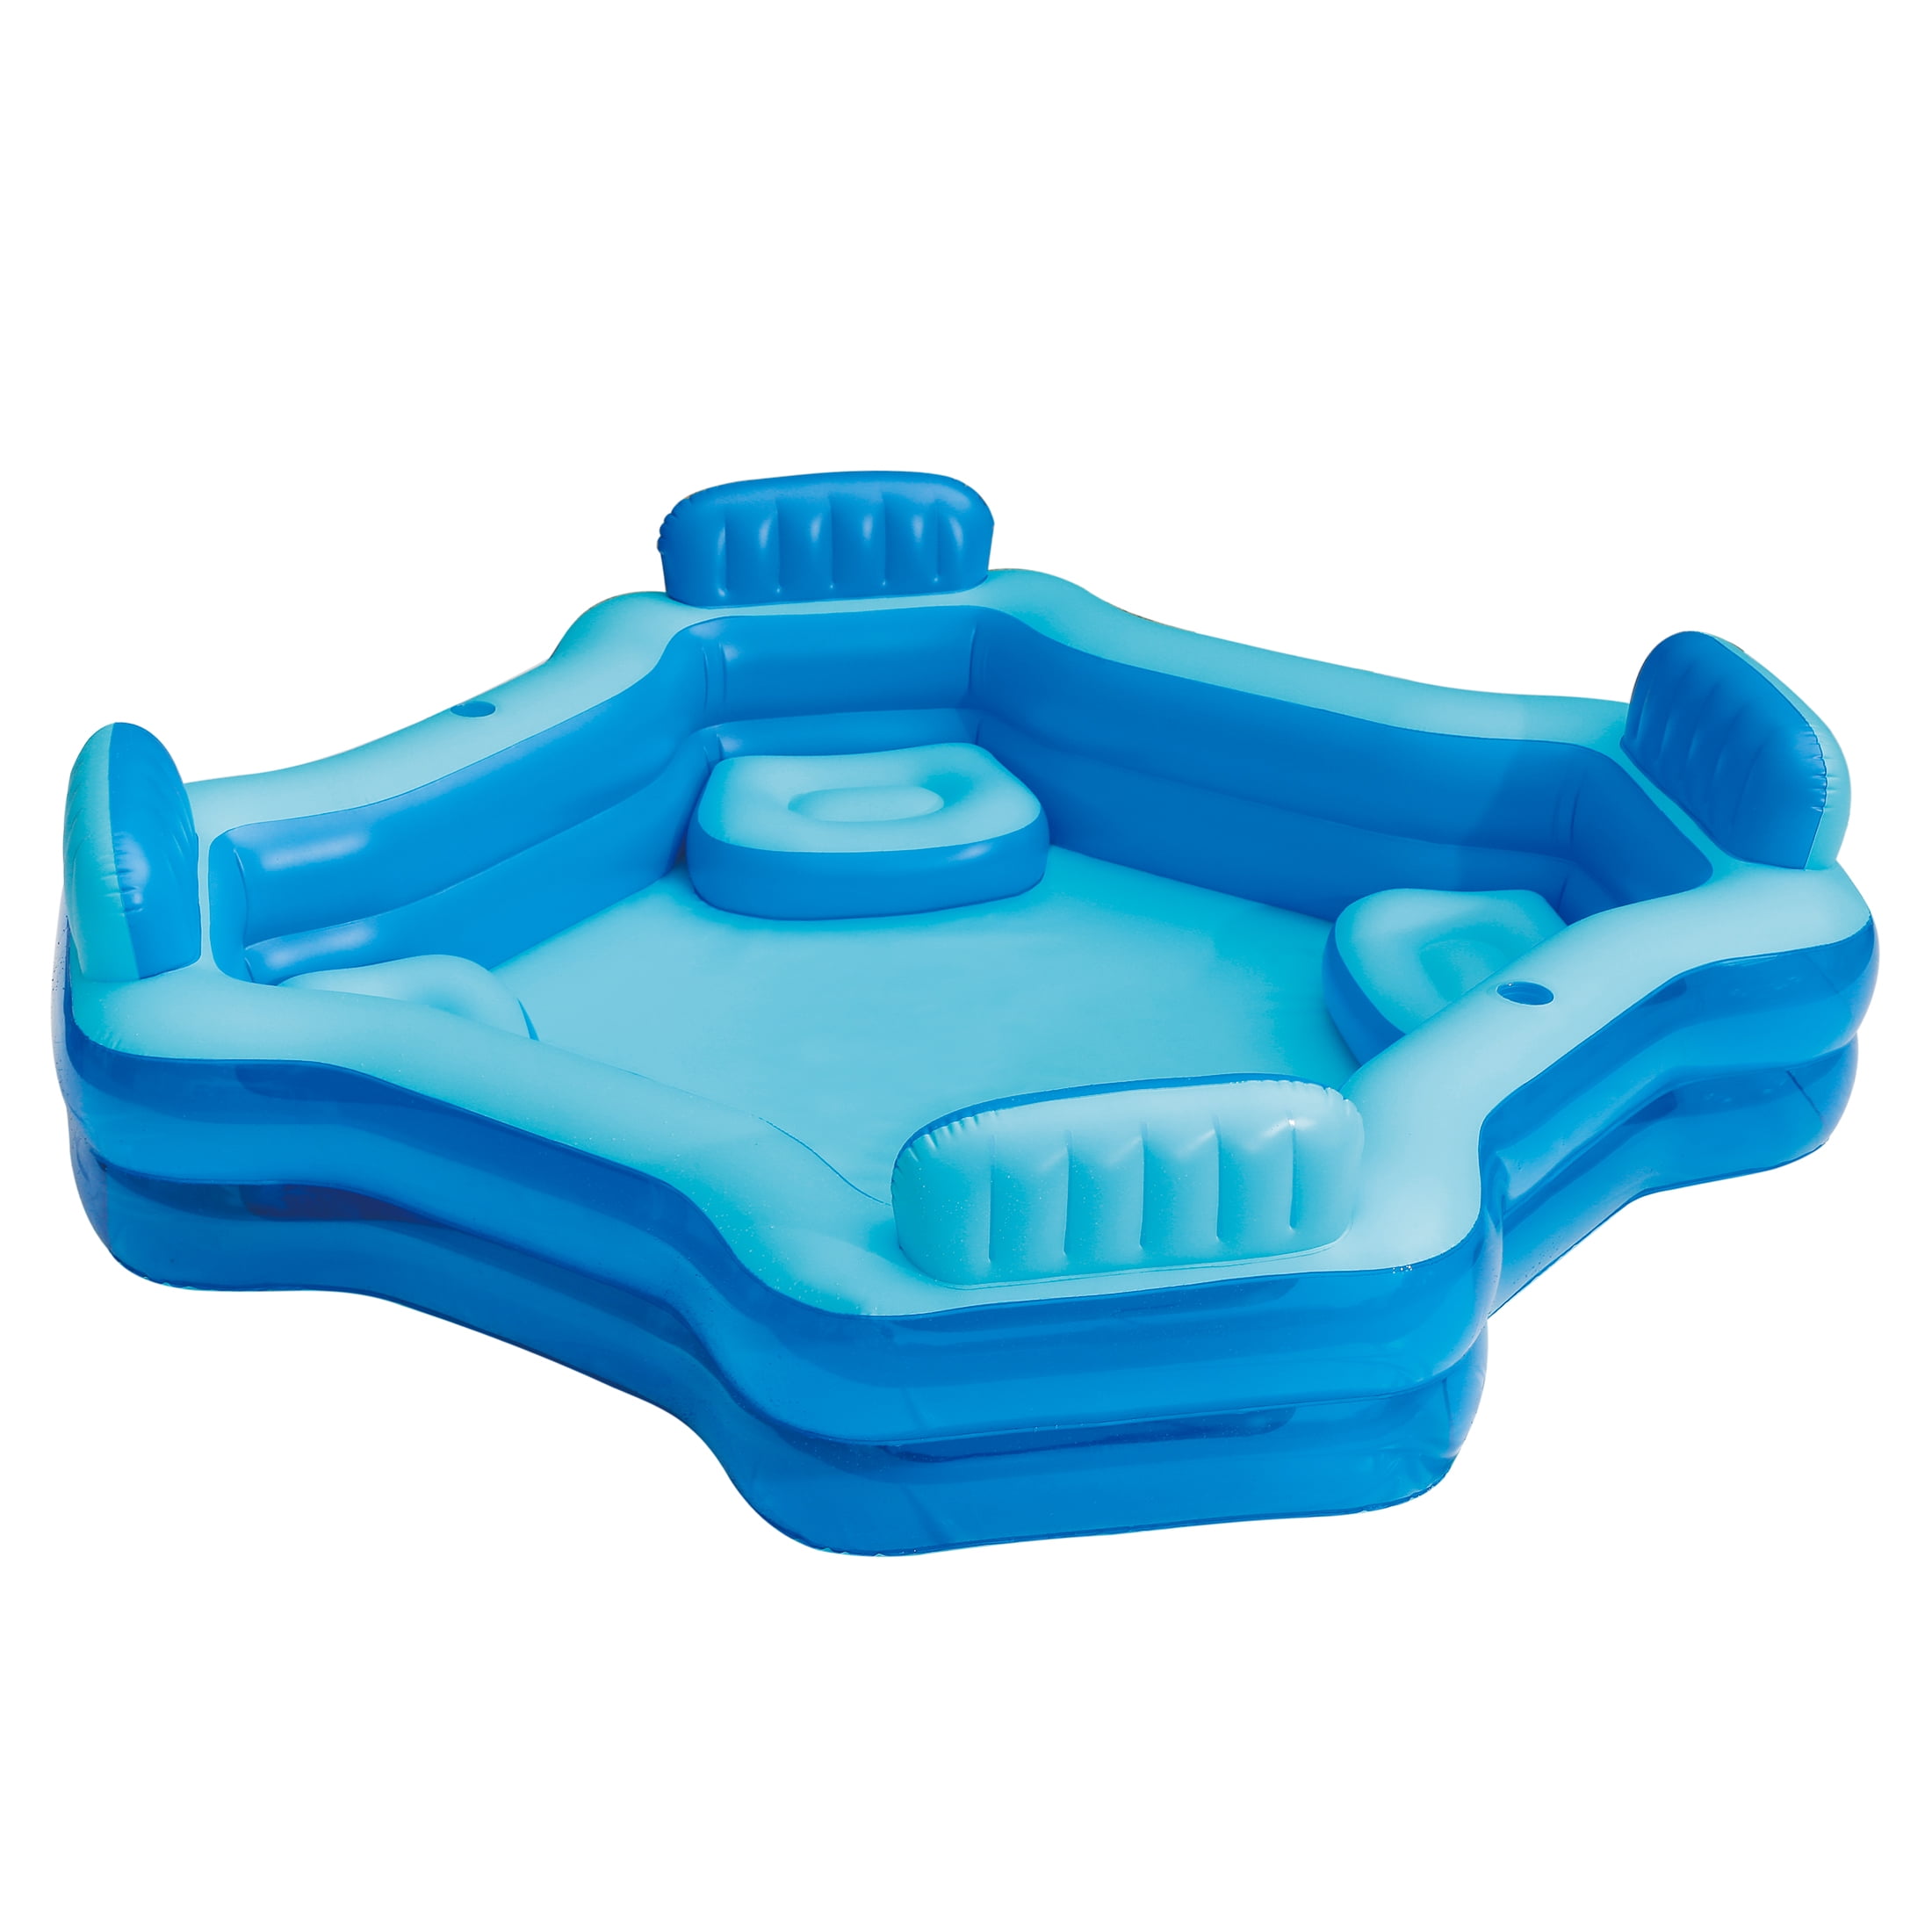 Bluescape Blue Deluxe Comfort Inflatable Family Pool, 4 Seats, Age 6 & Up